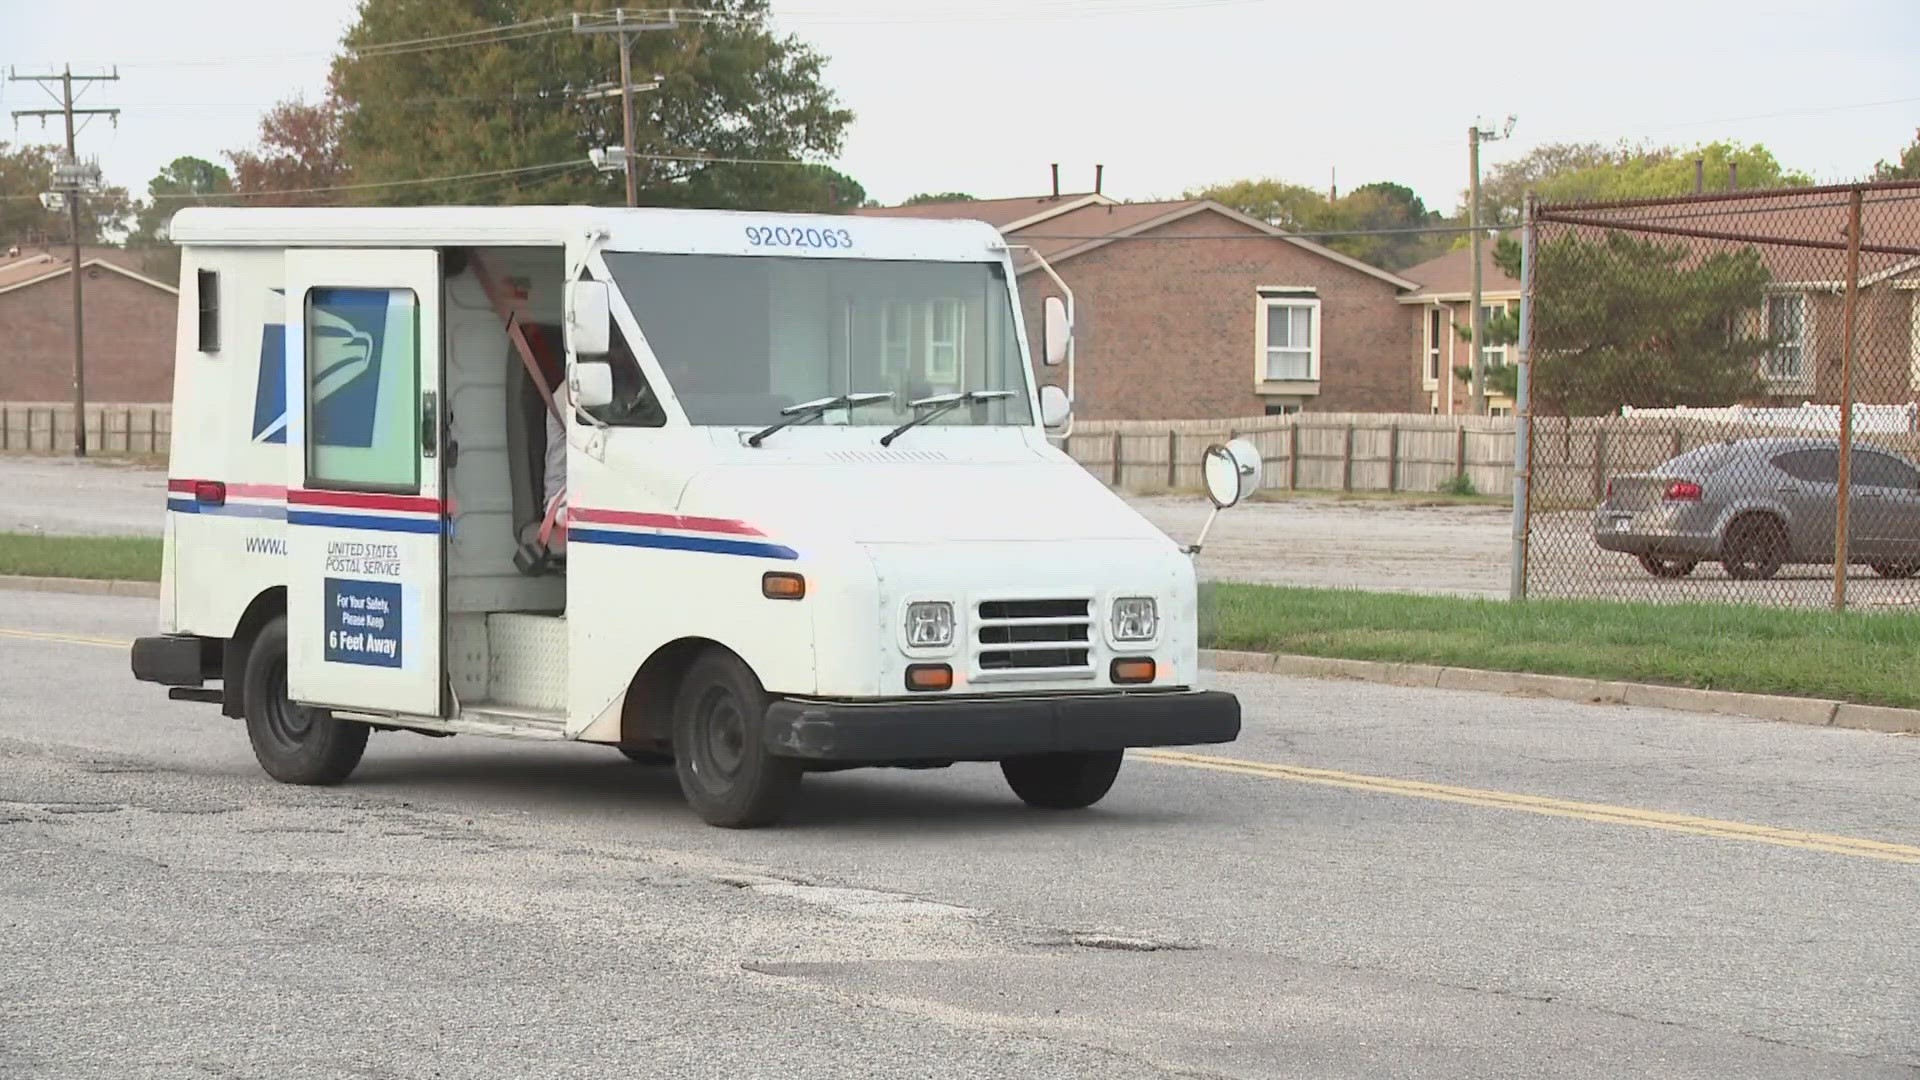 A bipartisan group of lawmakers who represent Virginia is now demanding the USPS take action.